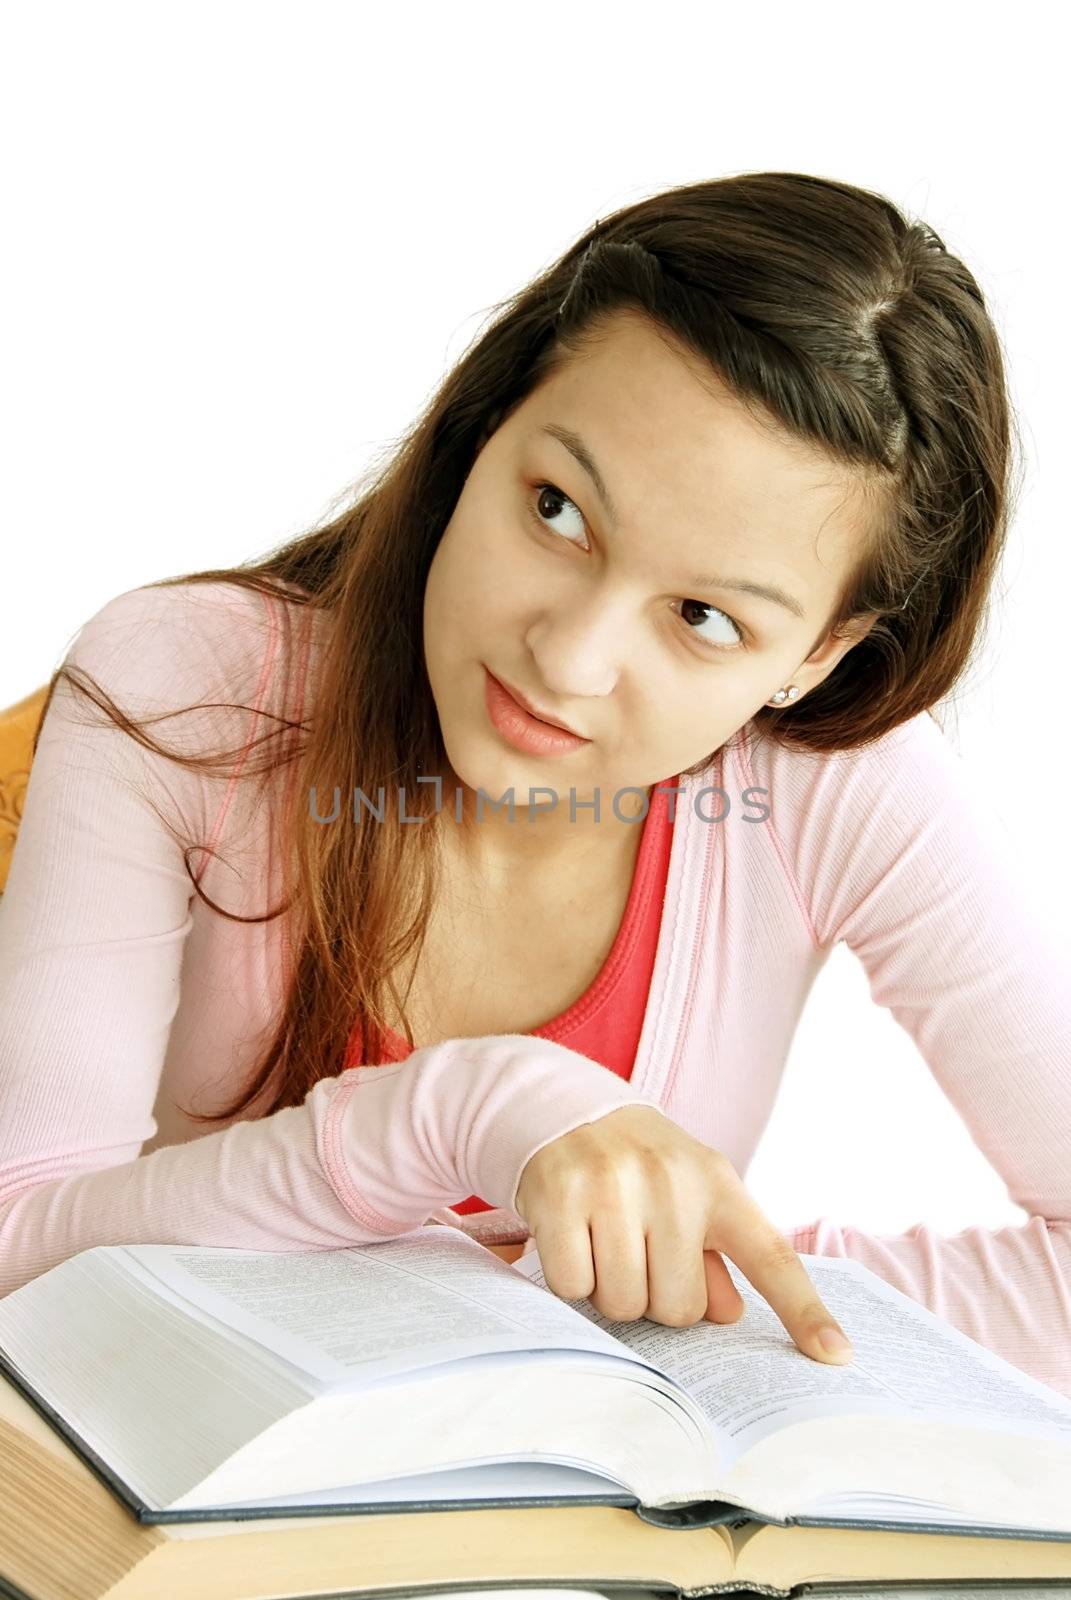 Teenage girl reading a book by simply